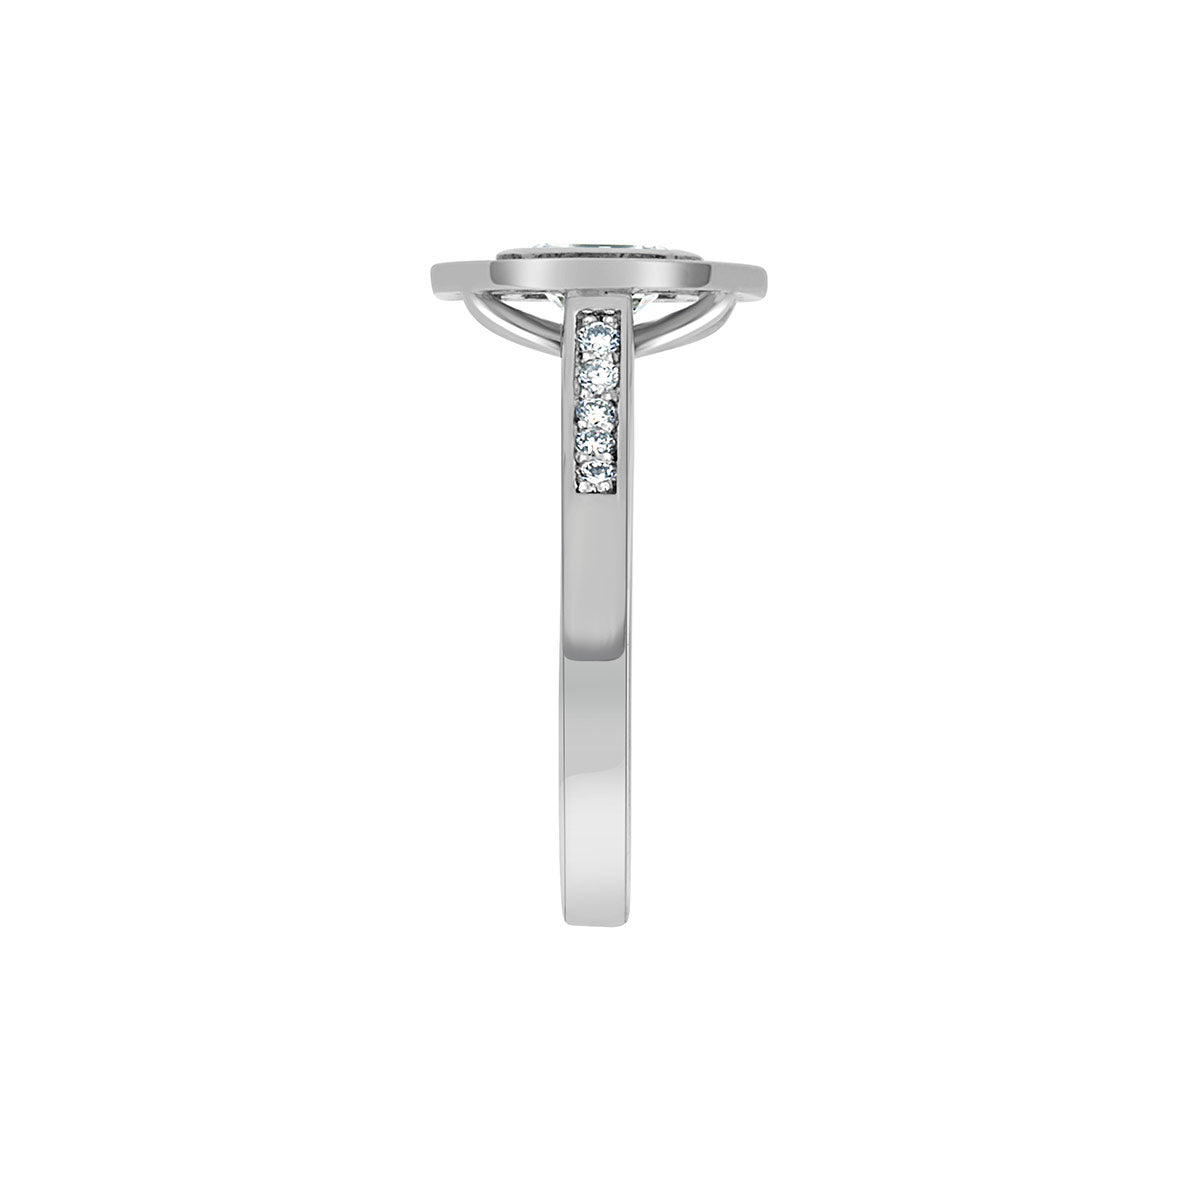 Emerald Cut Halo Ring in white gold upright and from a side view